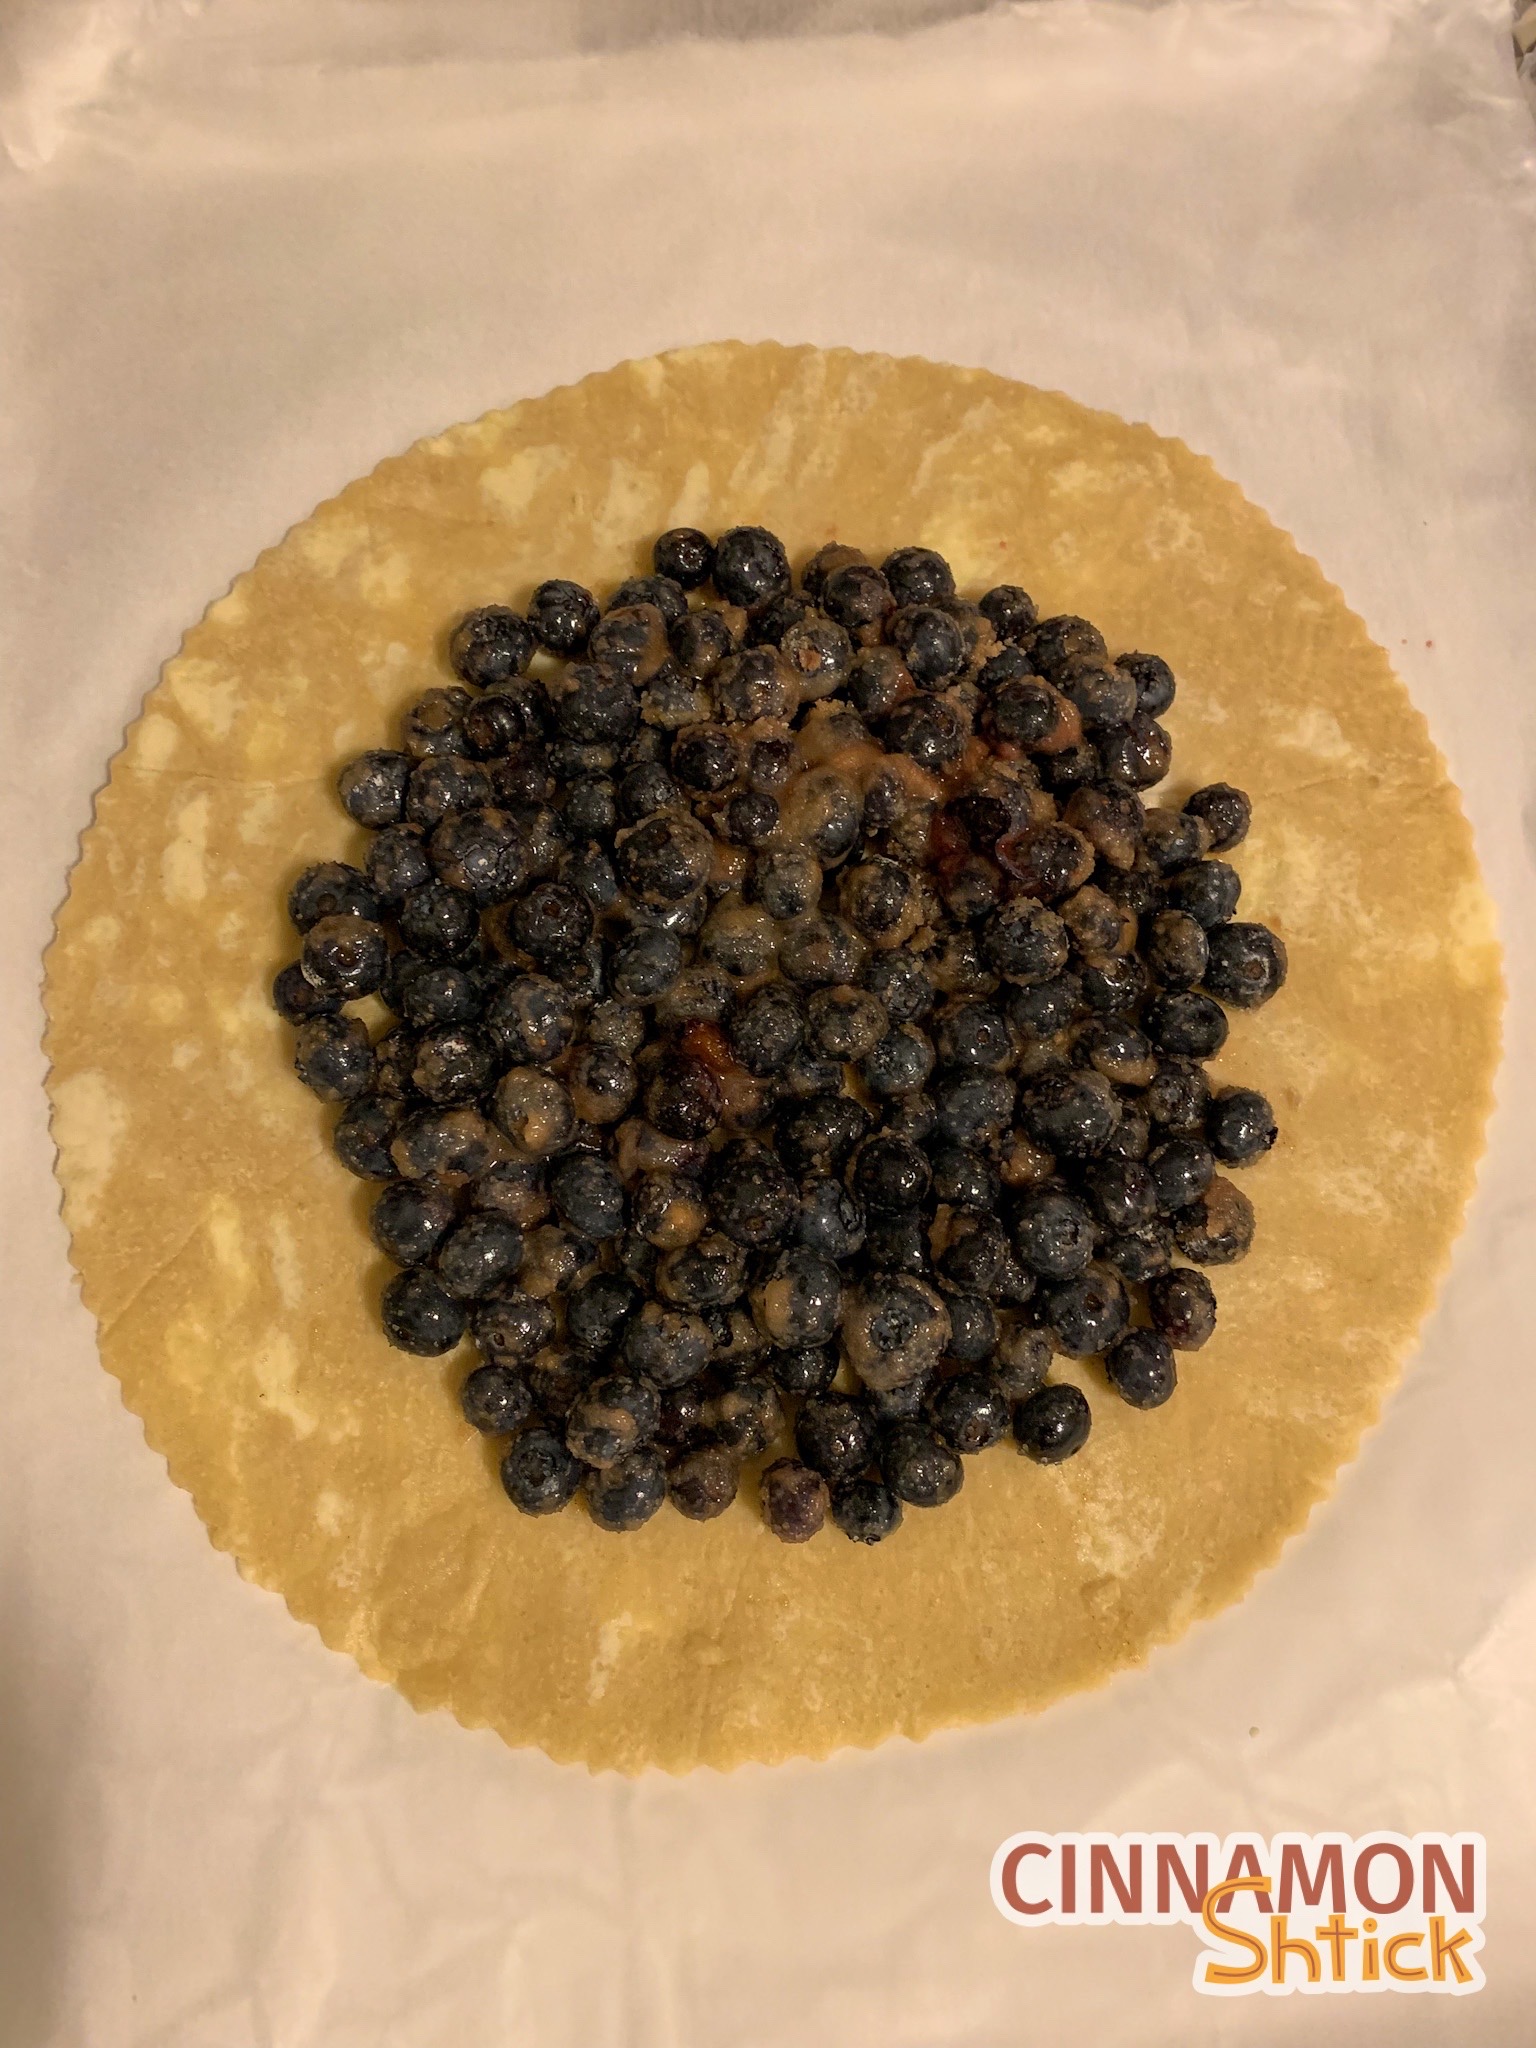 galette dough with blueberry filling in middle